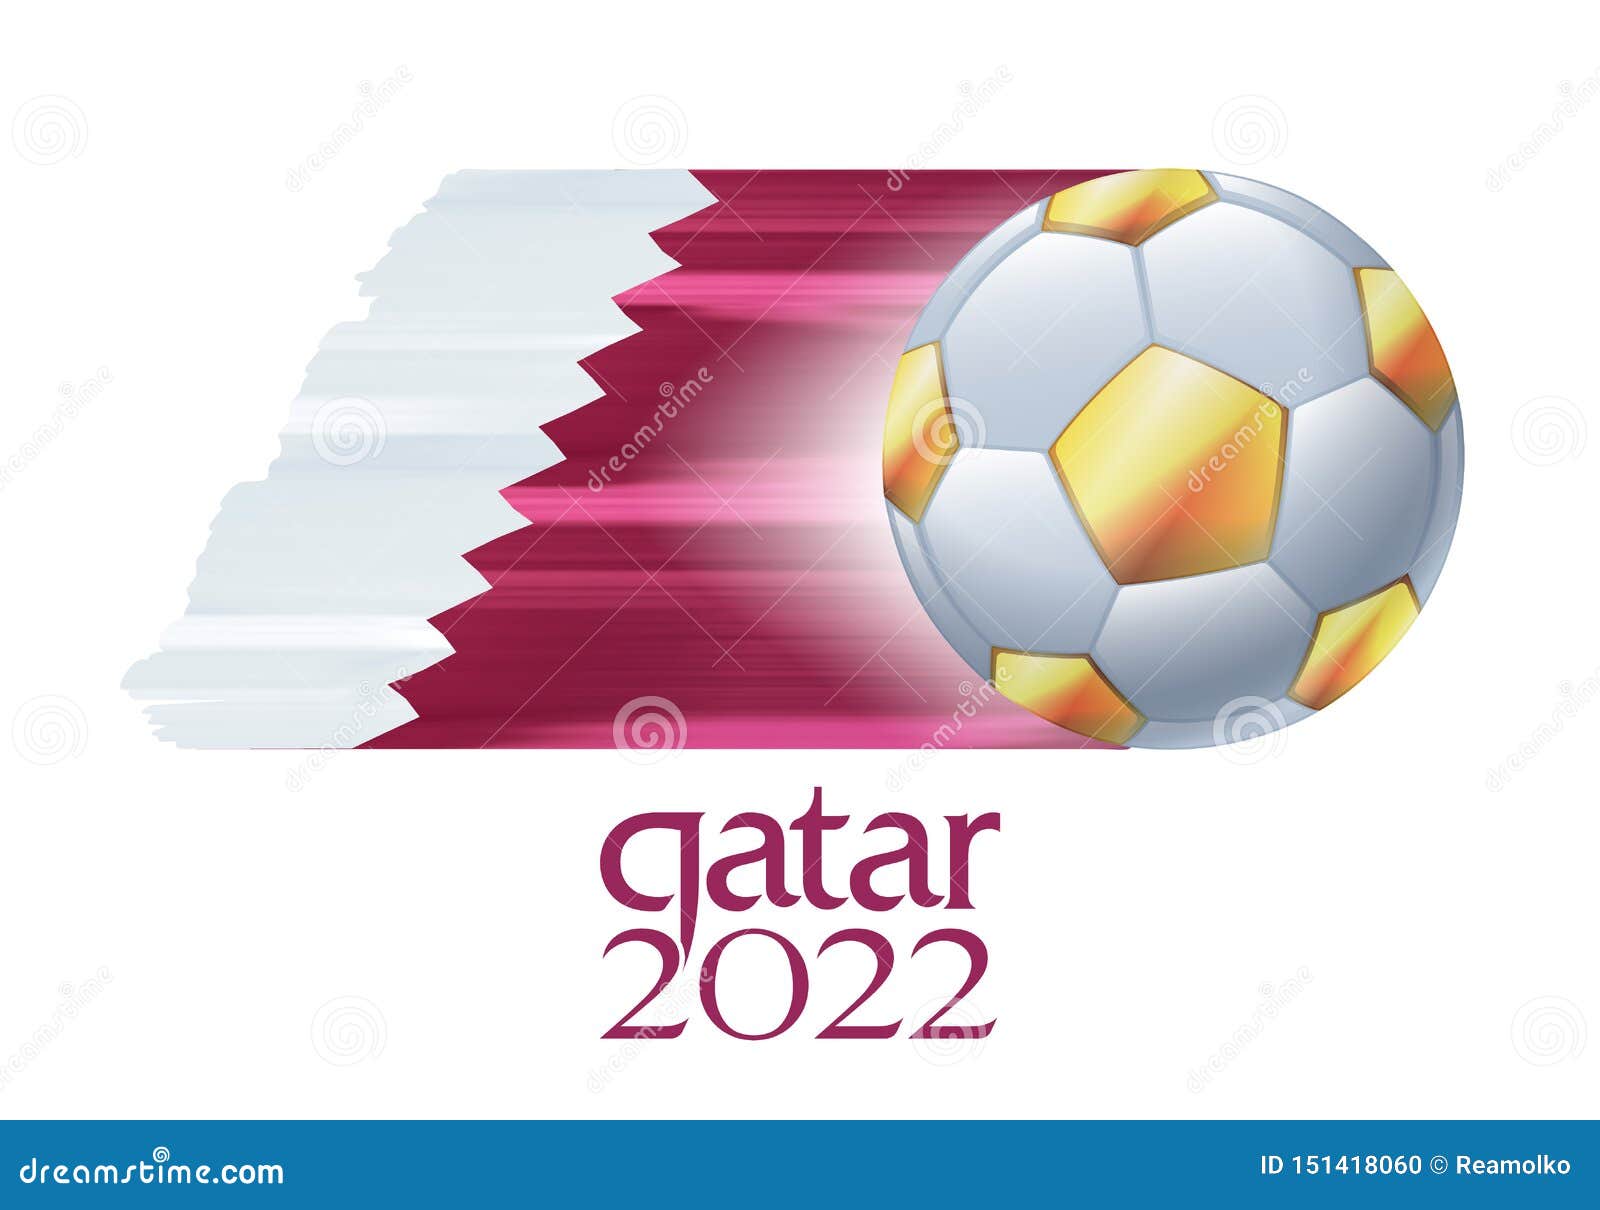 Qatar 2022 World Cup Emblem With Flag And Soccer Ball ...